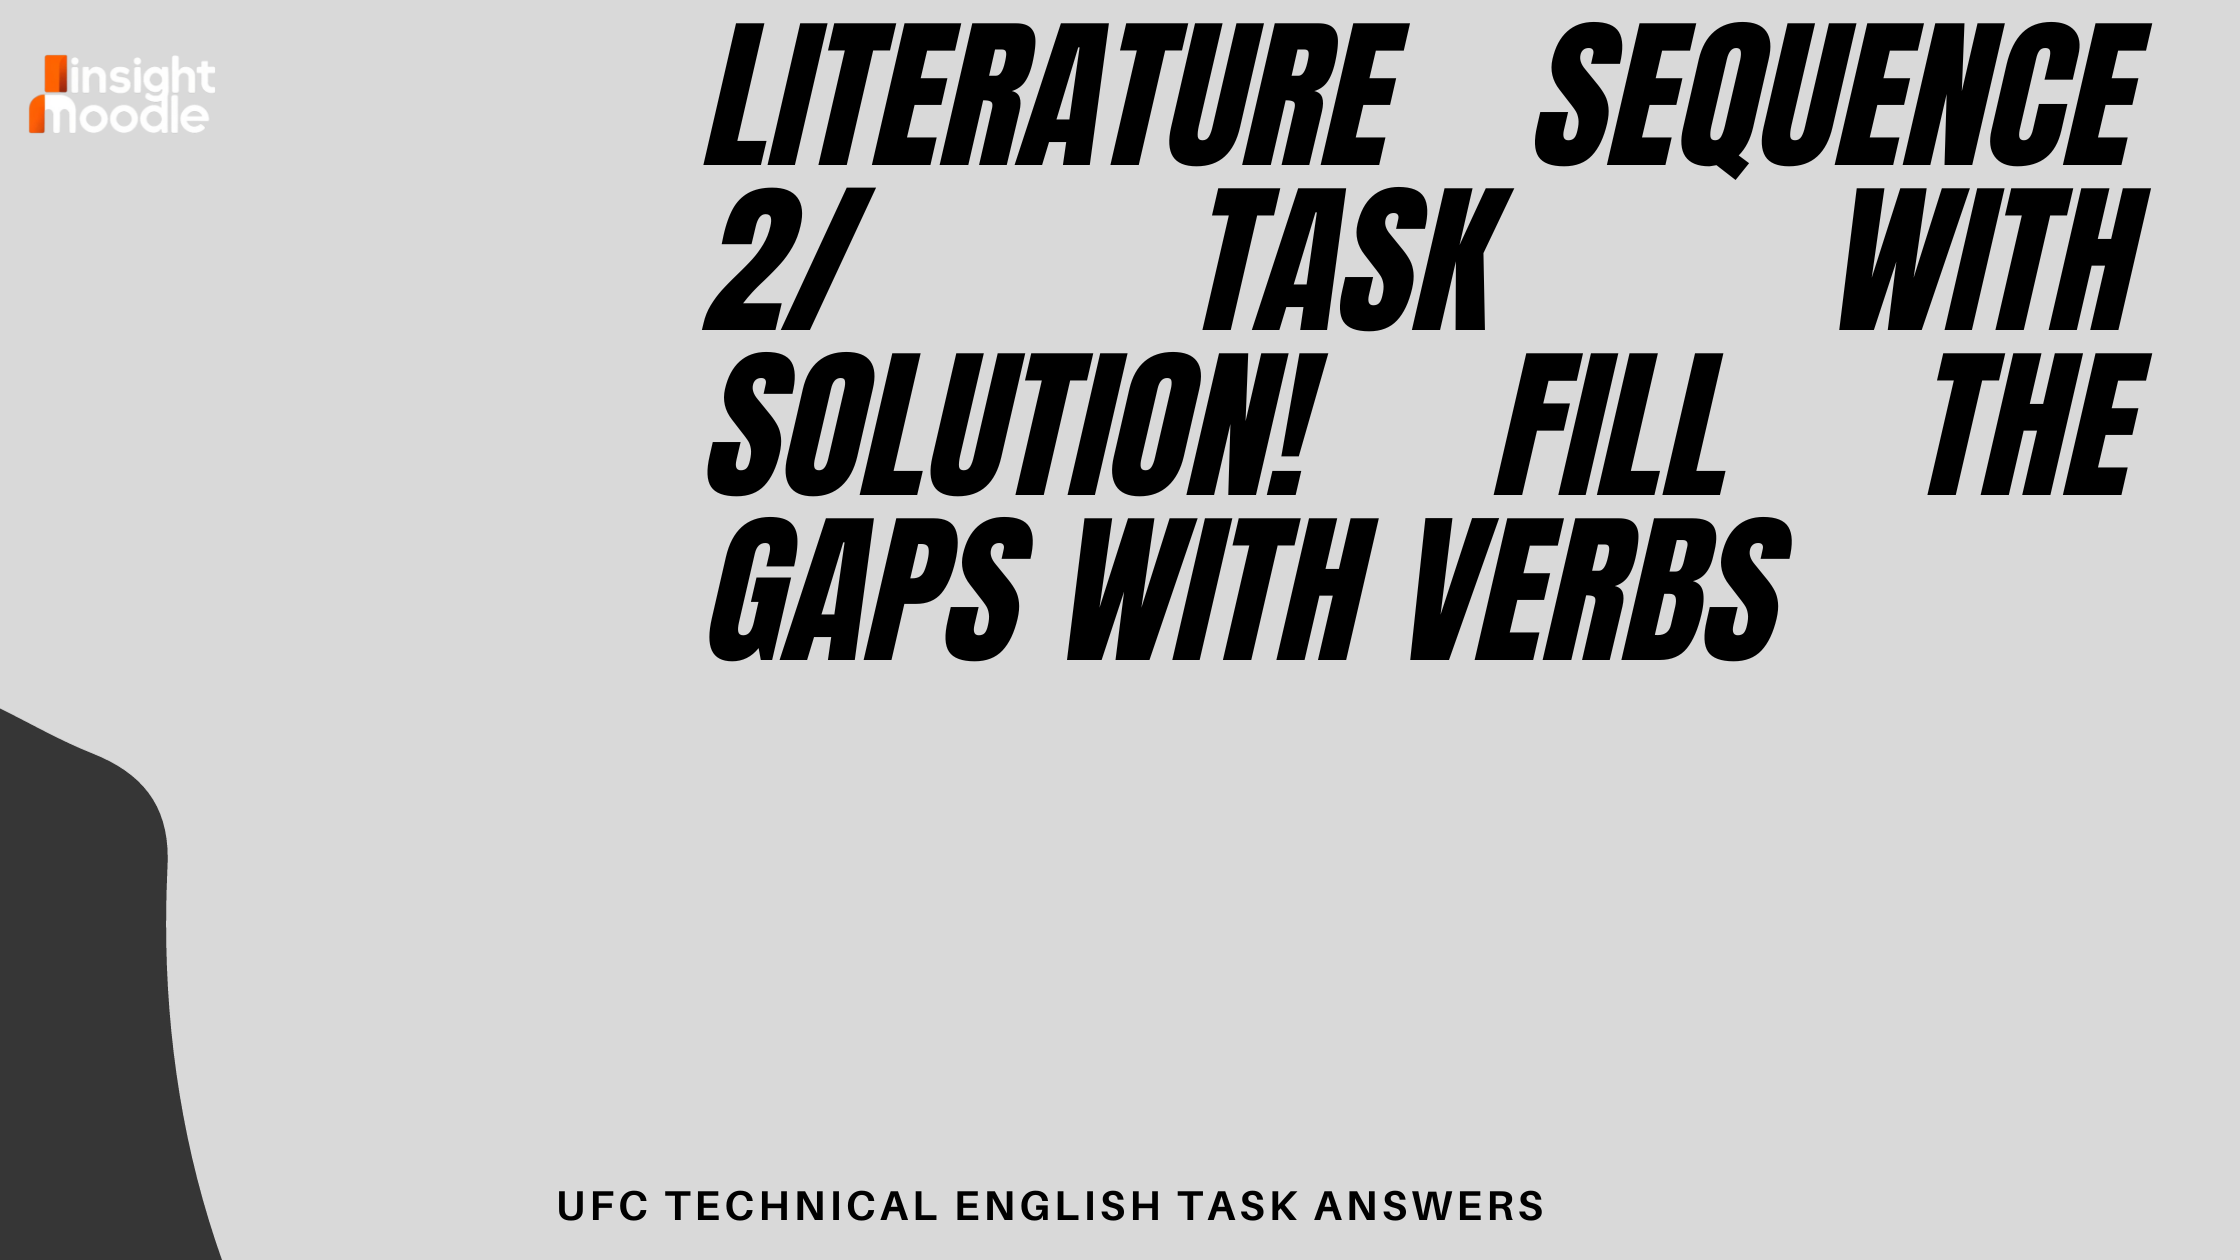 Literature sequence 2/ Task with solution! fill the gaps with verbs